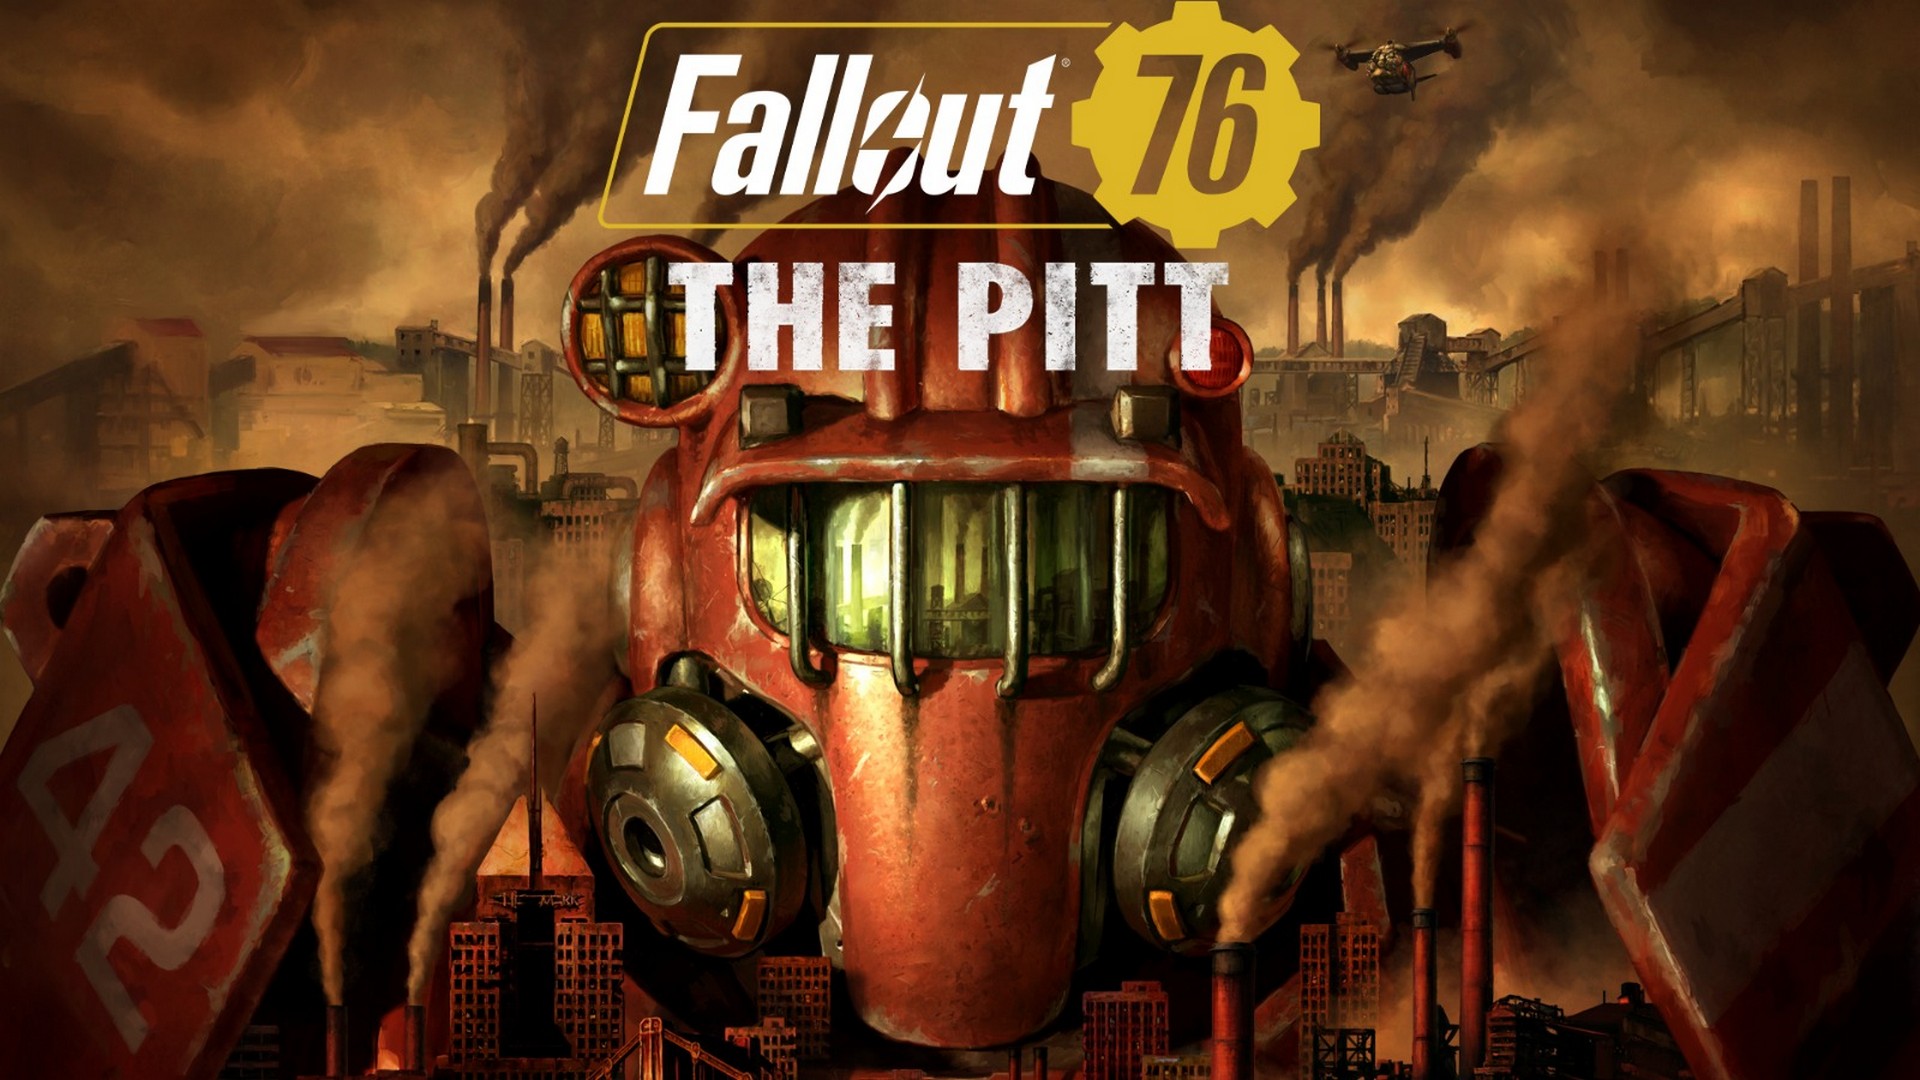 Fallout 76 Expeditions: The Pitt Is Now Available & Free To All Players